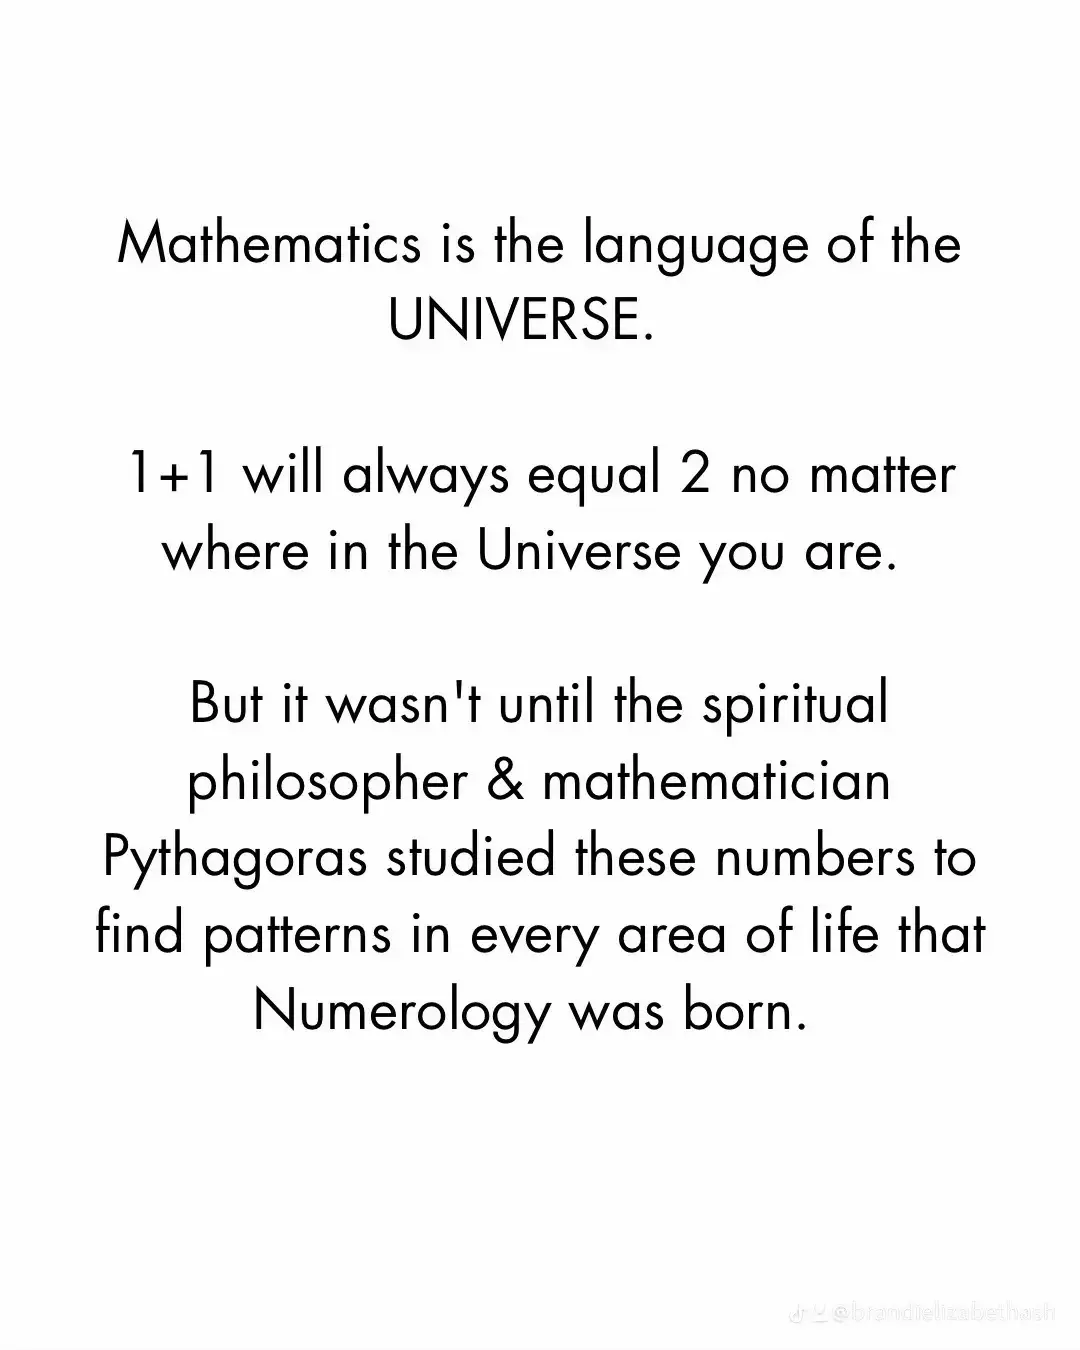  The image is a white background with the text "Mathematics is the language of the Universe" written in black.